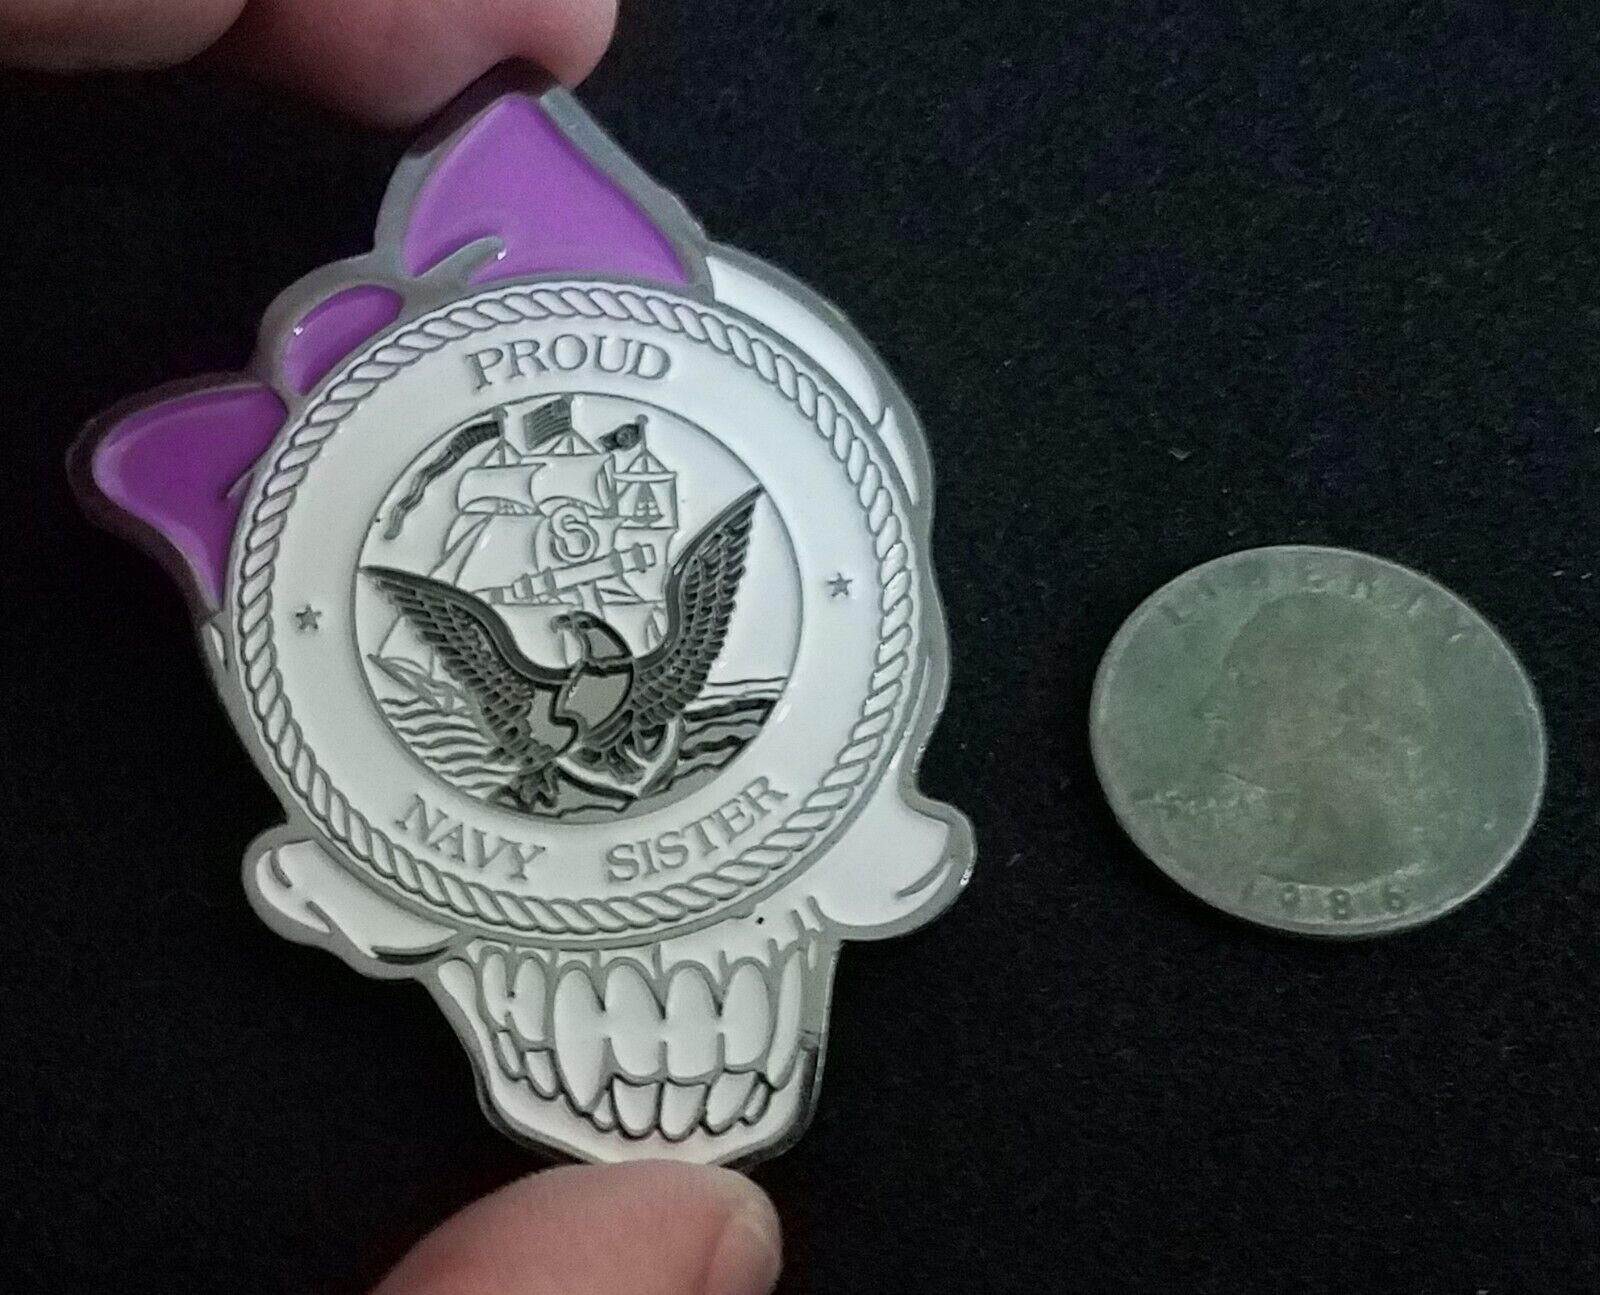 BAD@SS Proud Navy Sister United States Navy Naval SKULL USN US Challenge Coin